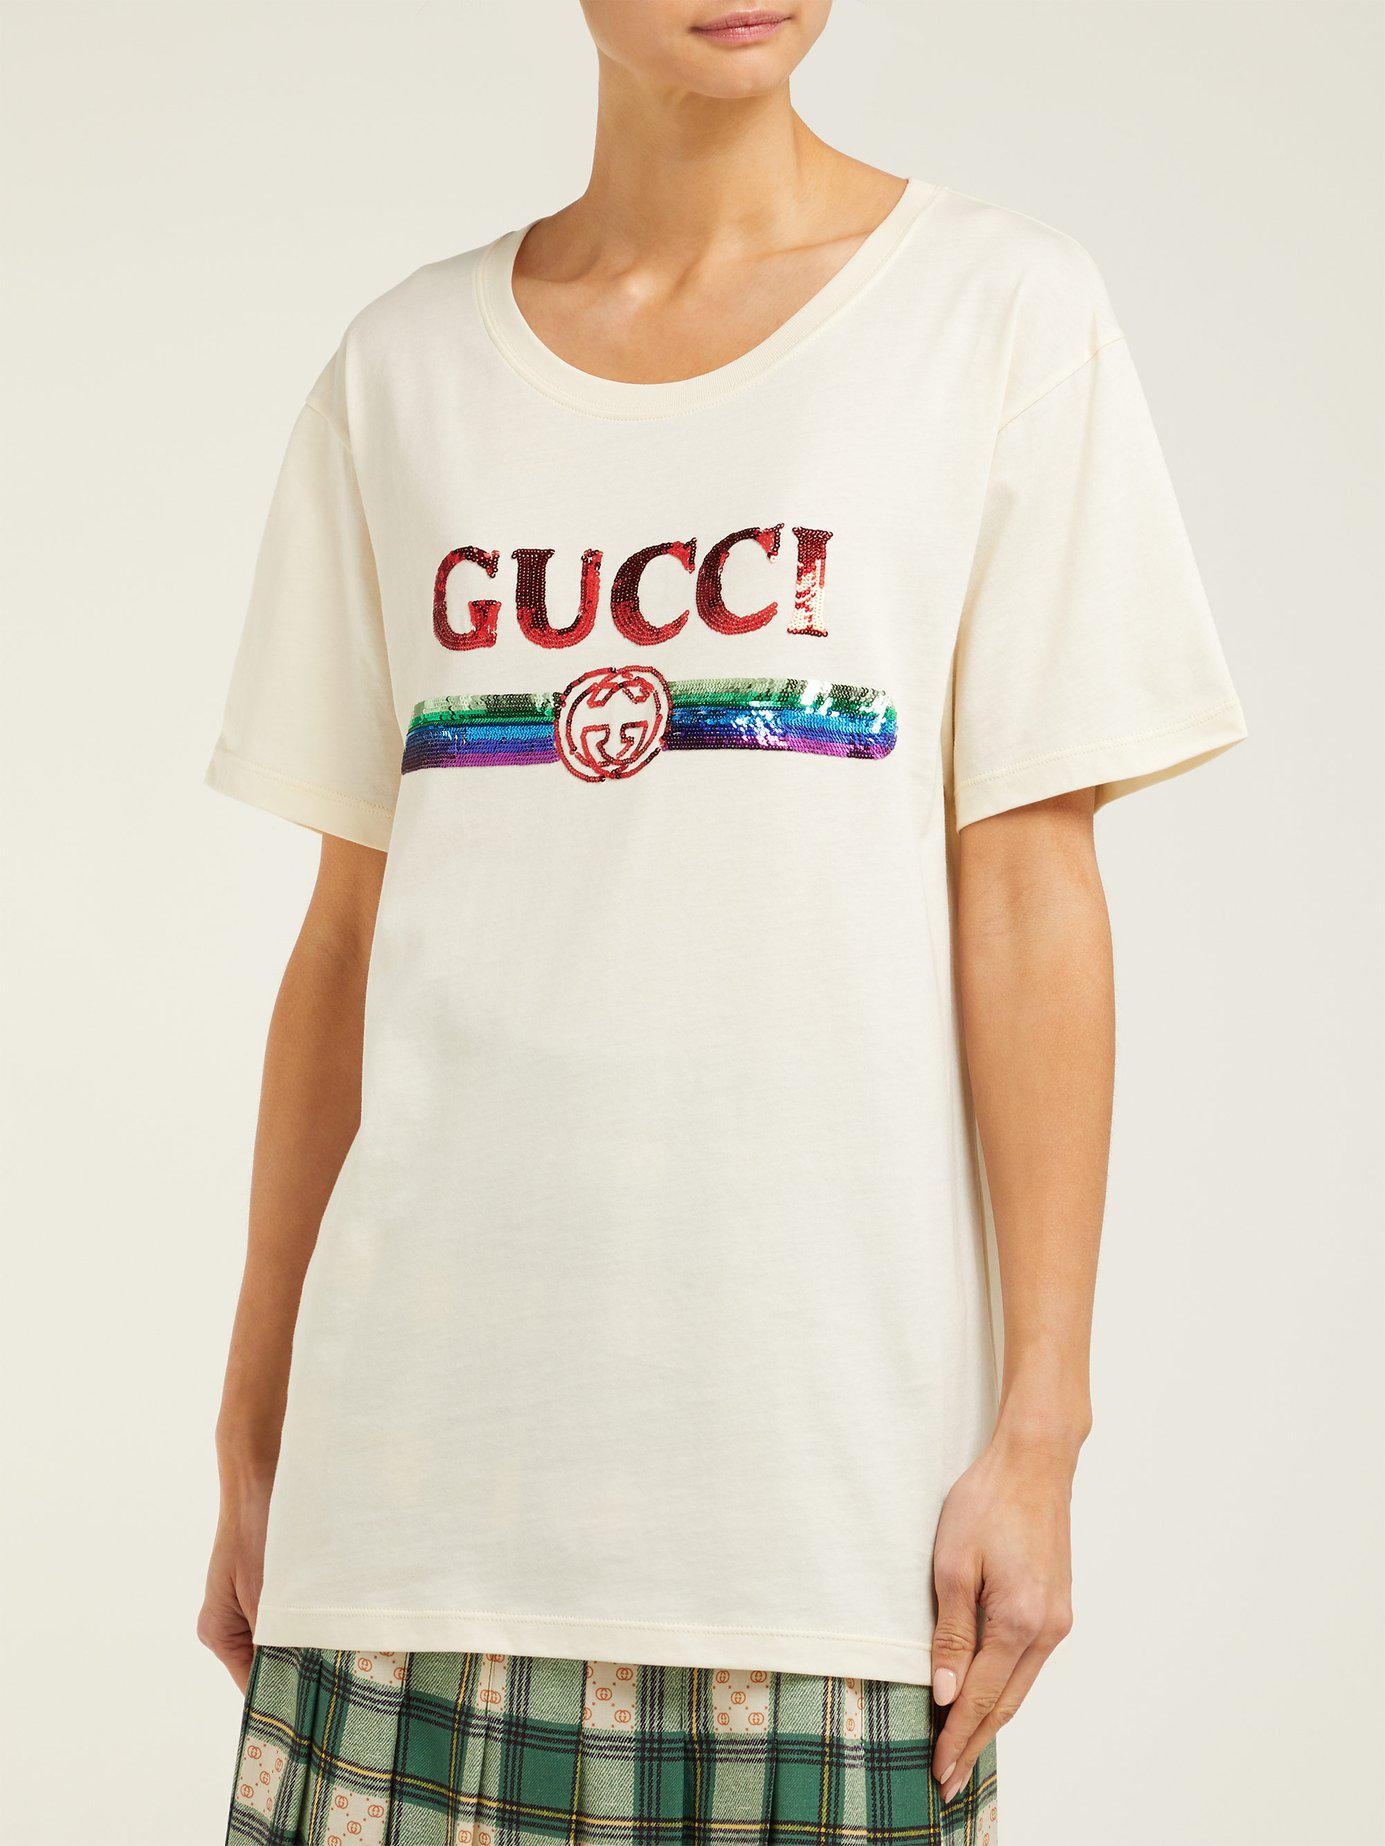 Gucci Sequin Embellished Logo Cotton T Shirt in White - Lyst